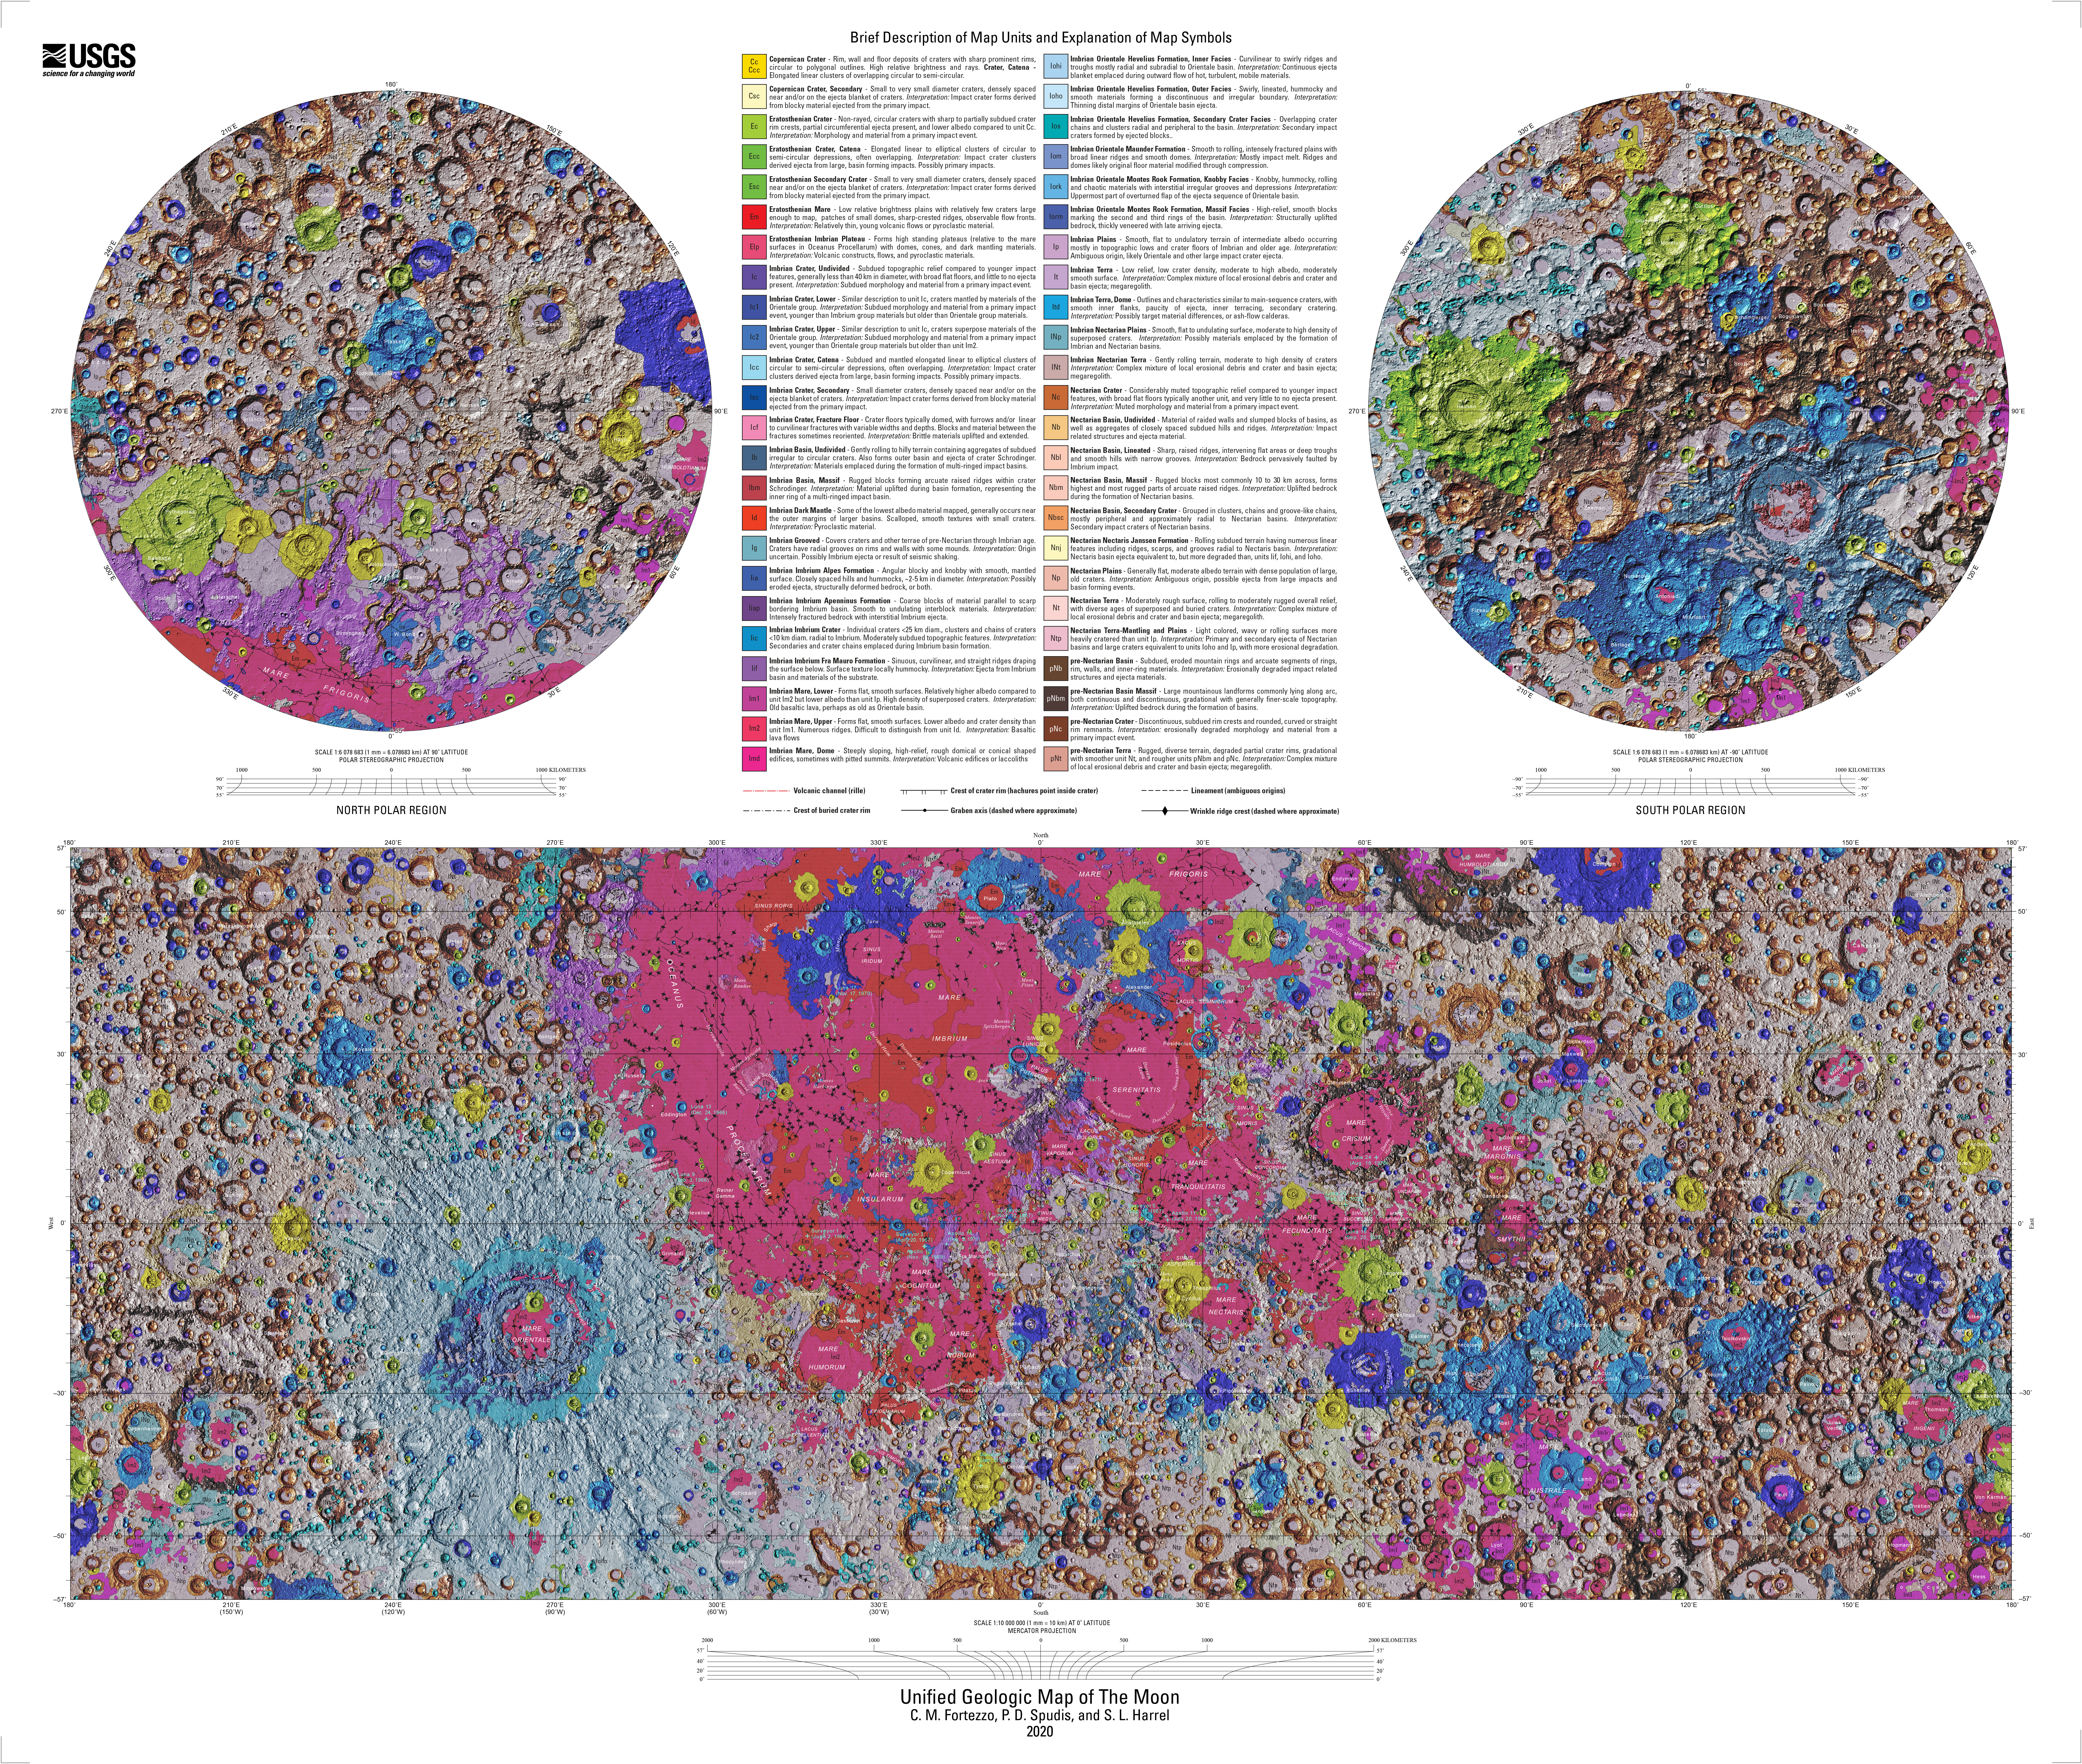 Unified_Geologic_Map_of_The_Moon_200dpi.